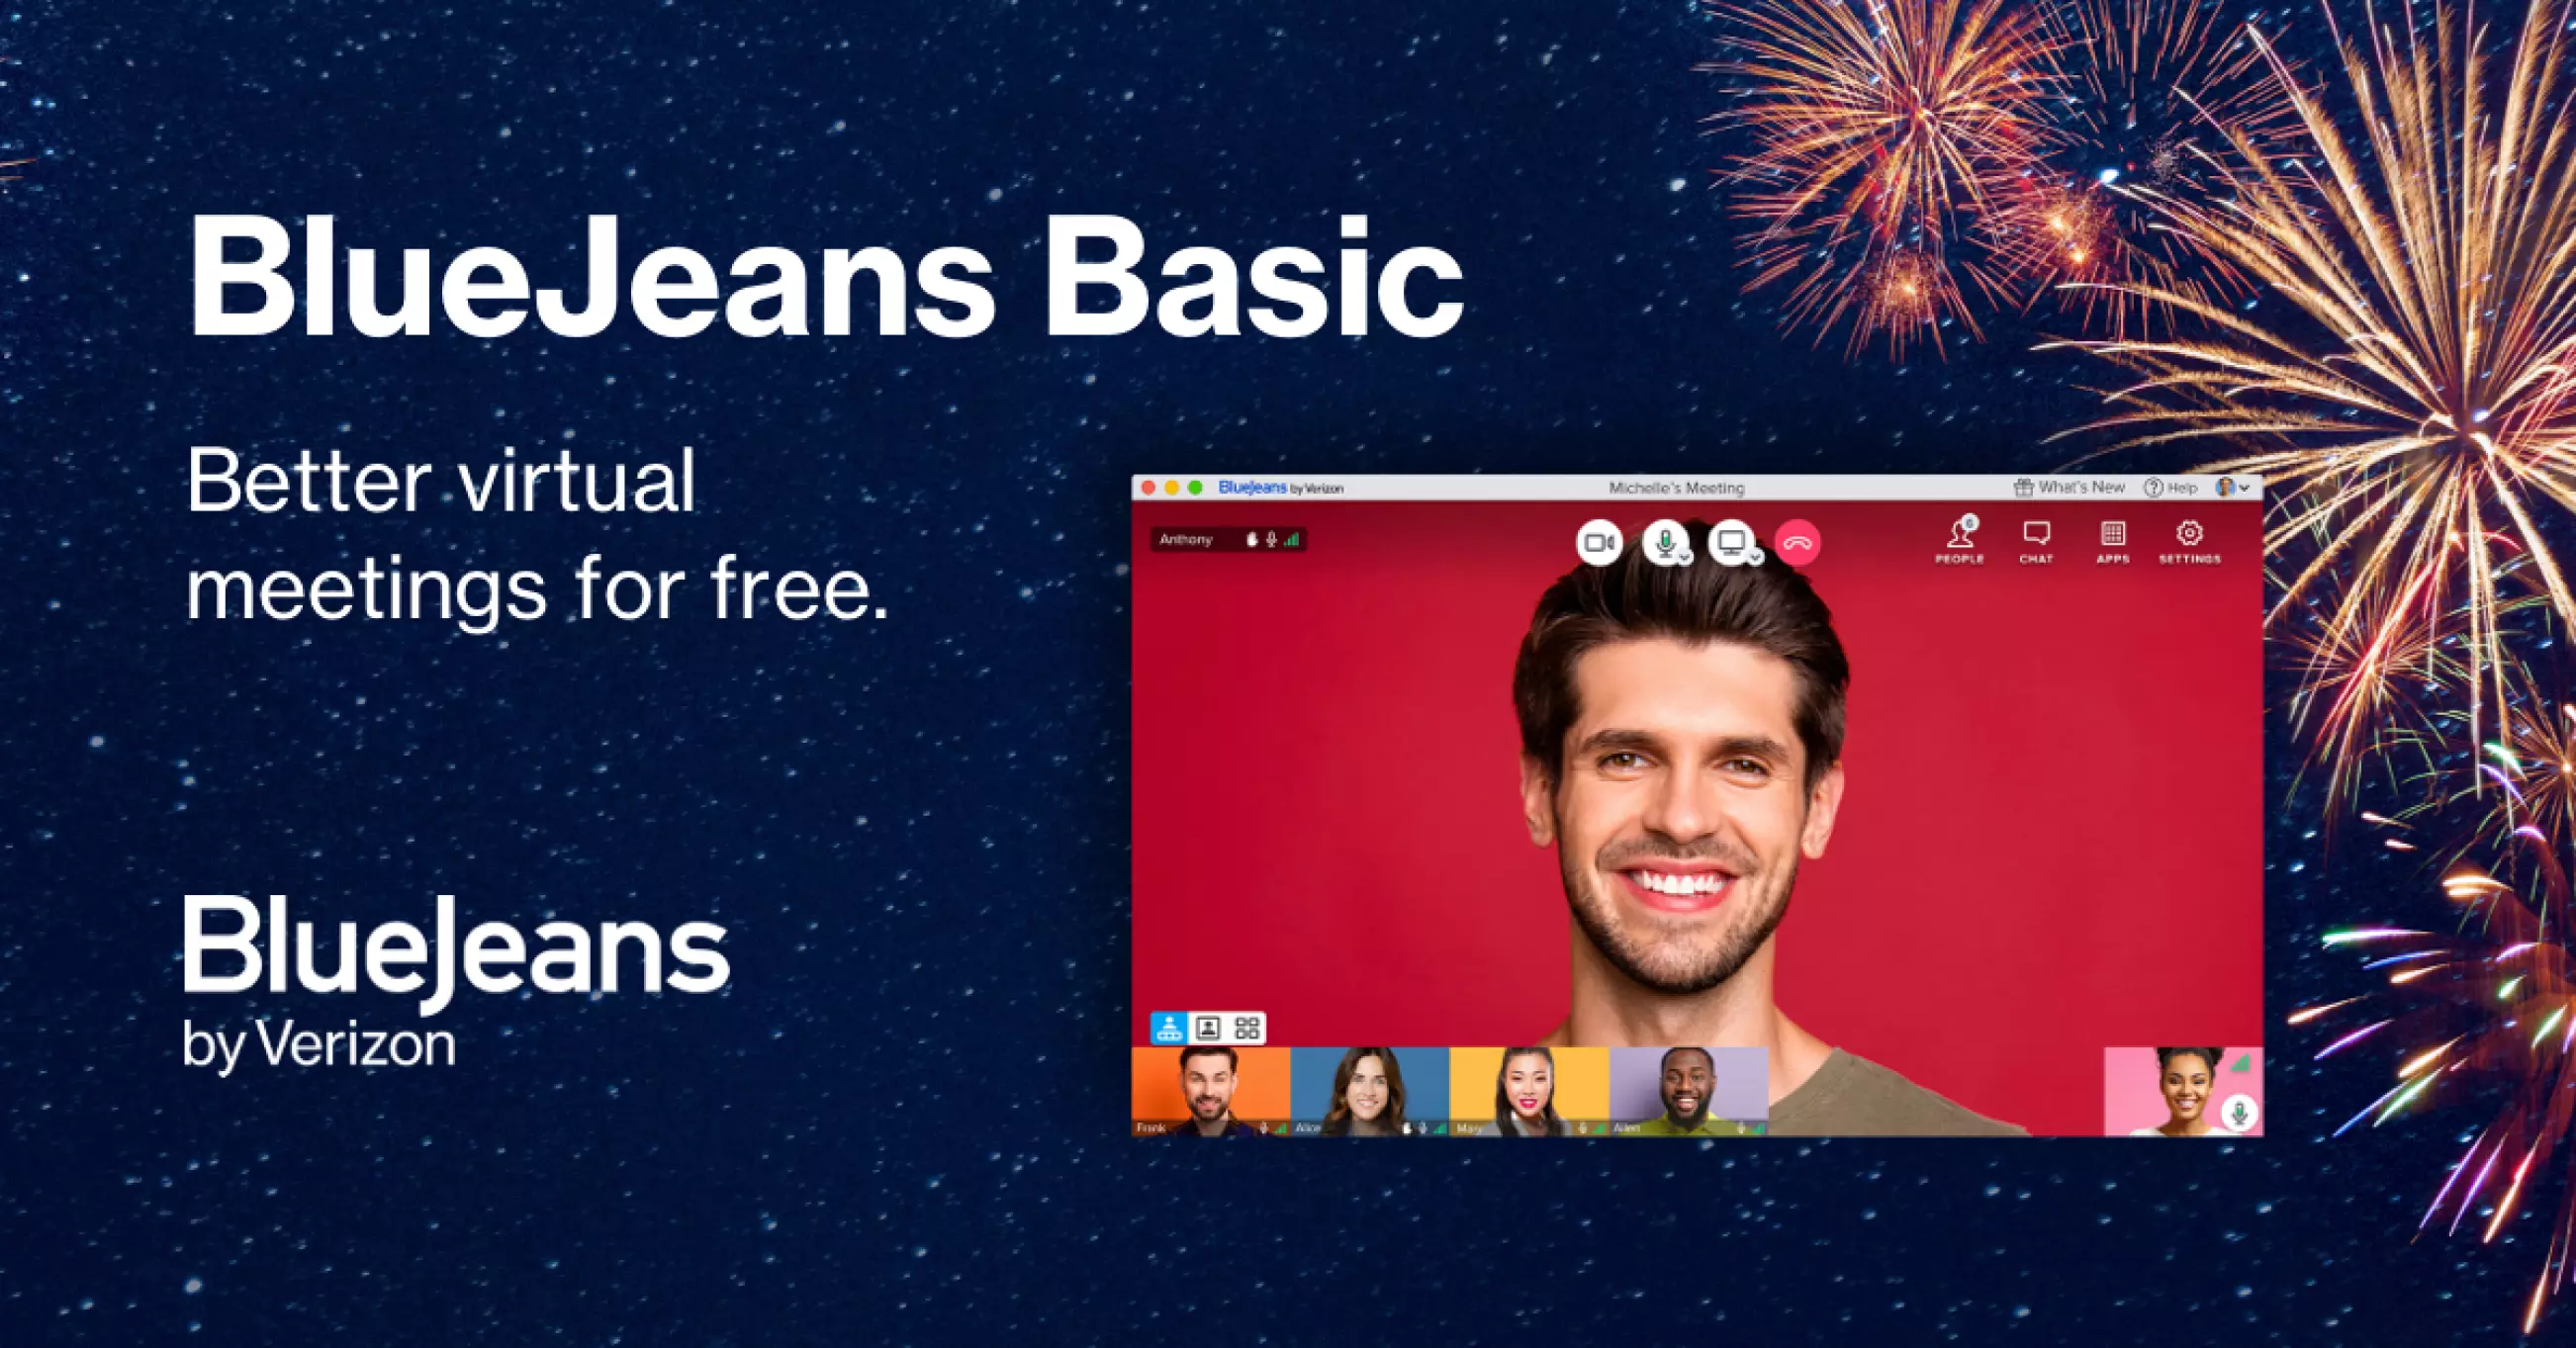 BlueJeans by Verizon releases better meetings for free with BlueJeans Basic